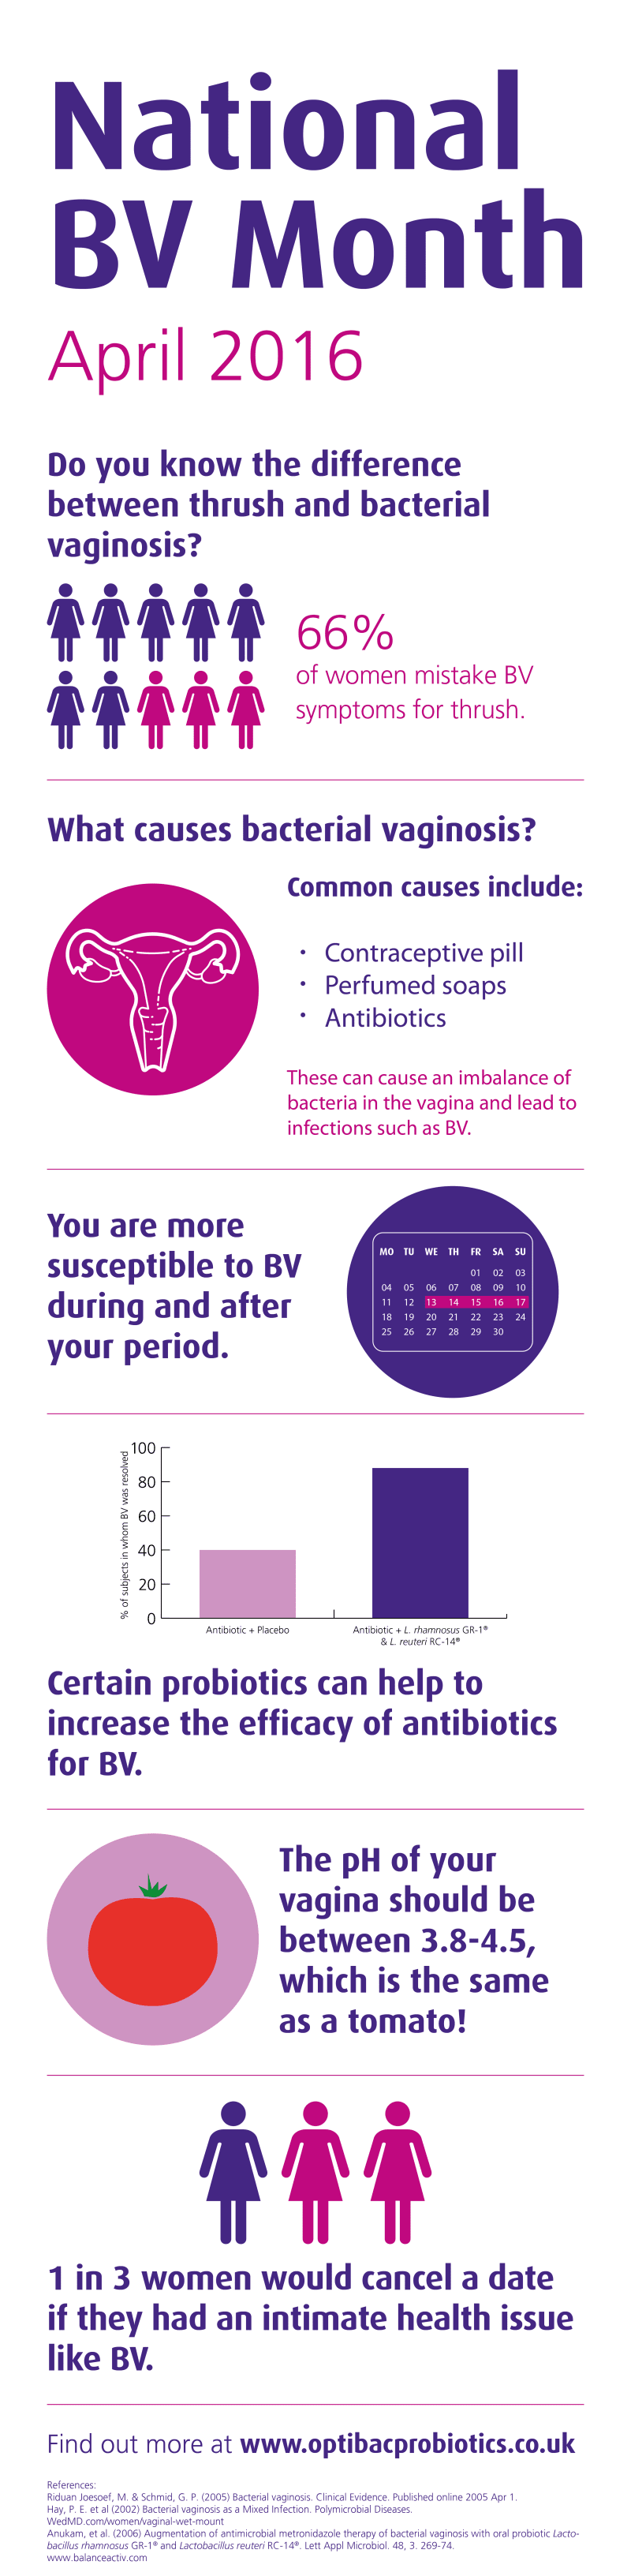 National BV Month: Infographic